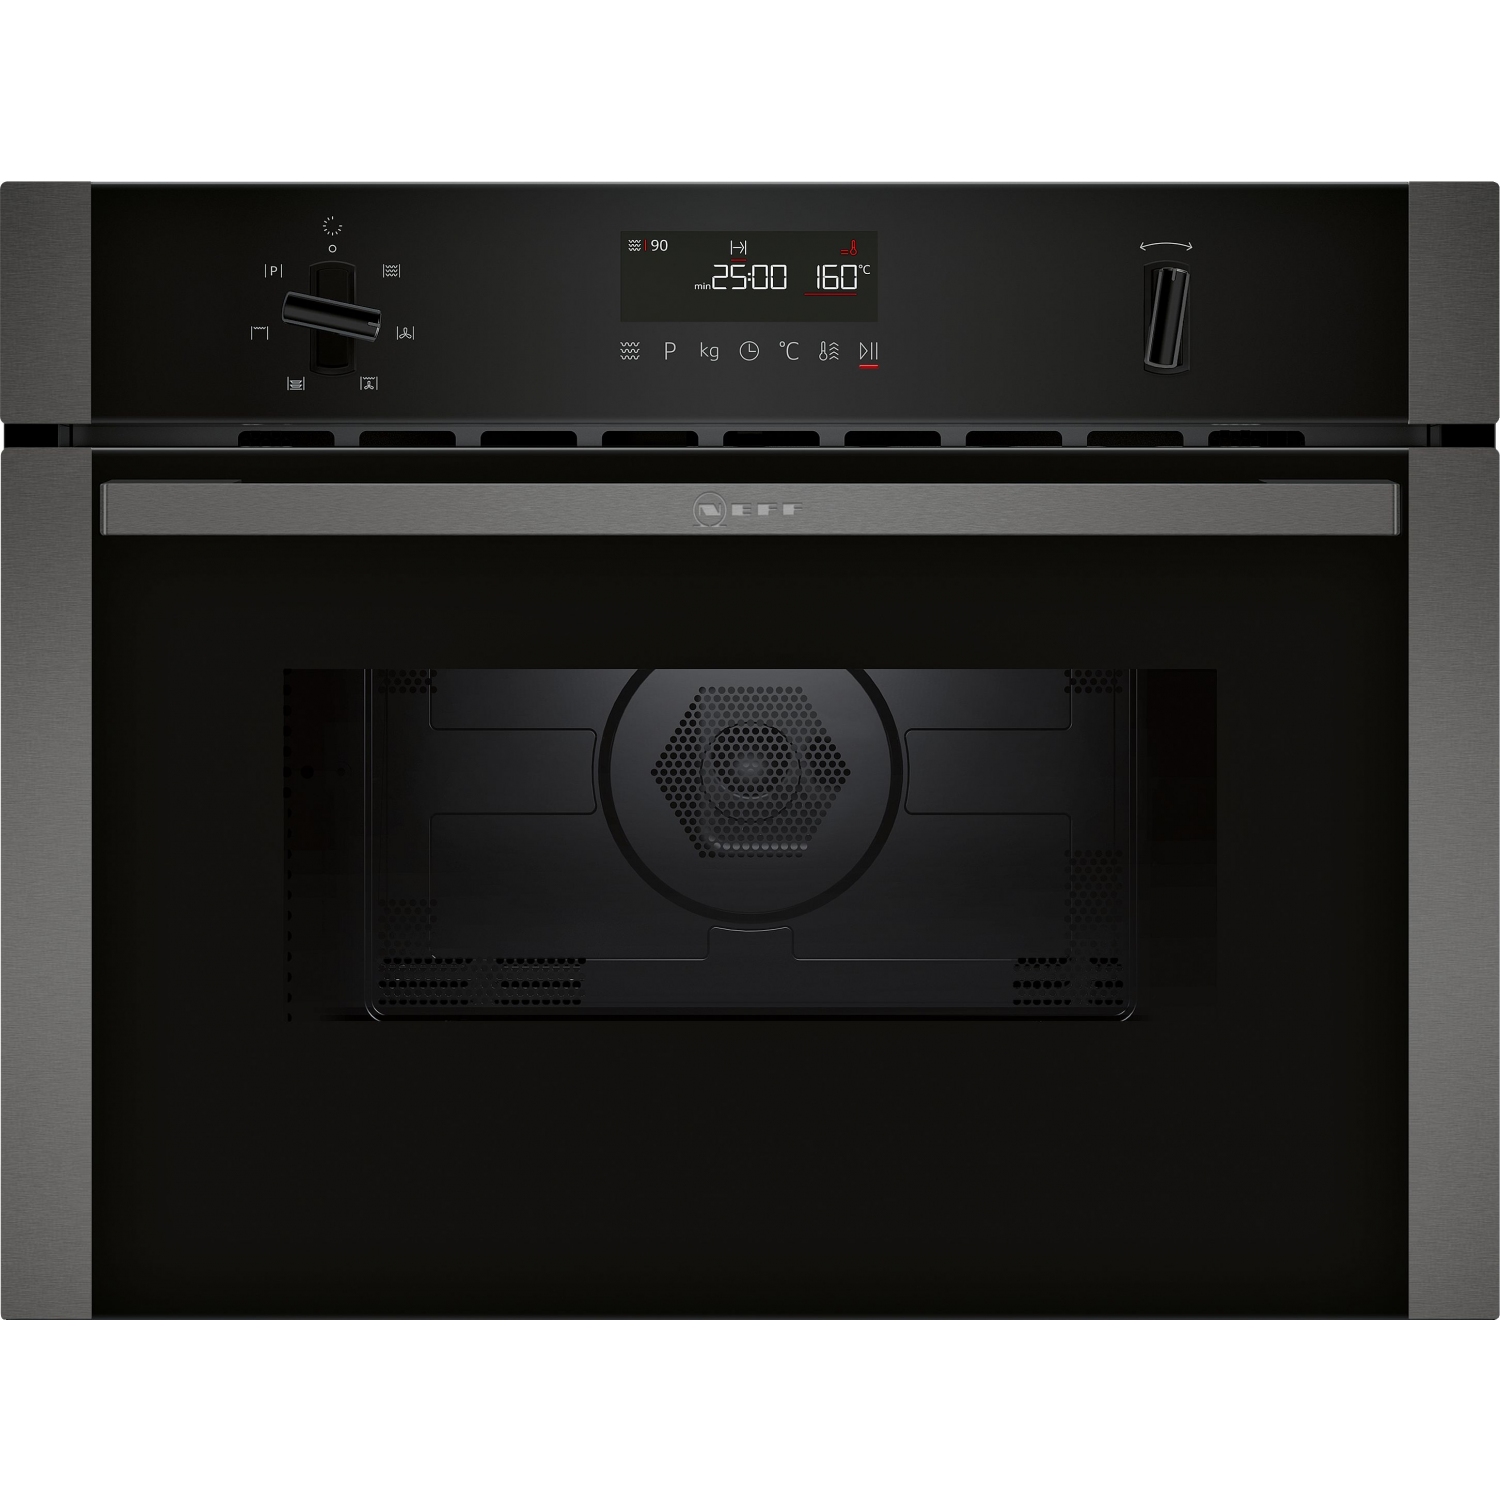 Neff C1AMG84G0B 44 Litres Built In Microwave Oven with Hot Air - Black with Graphite Trim - 0